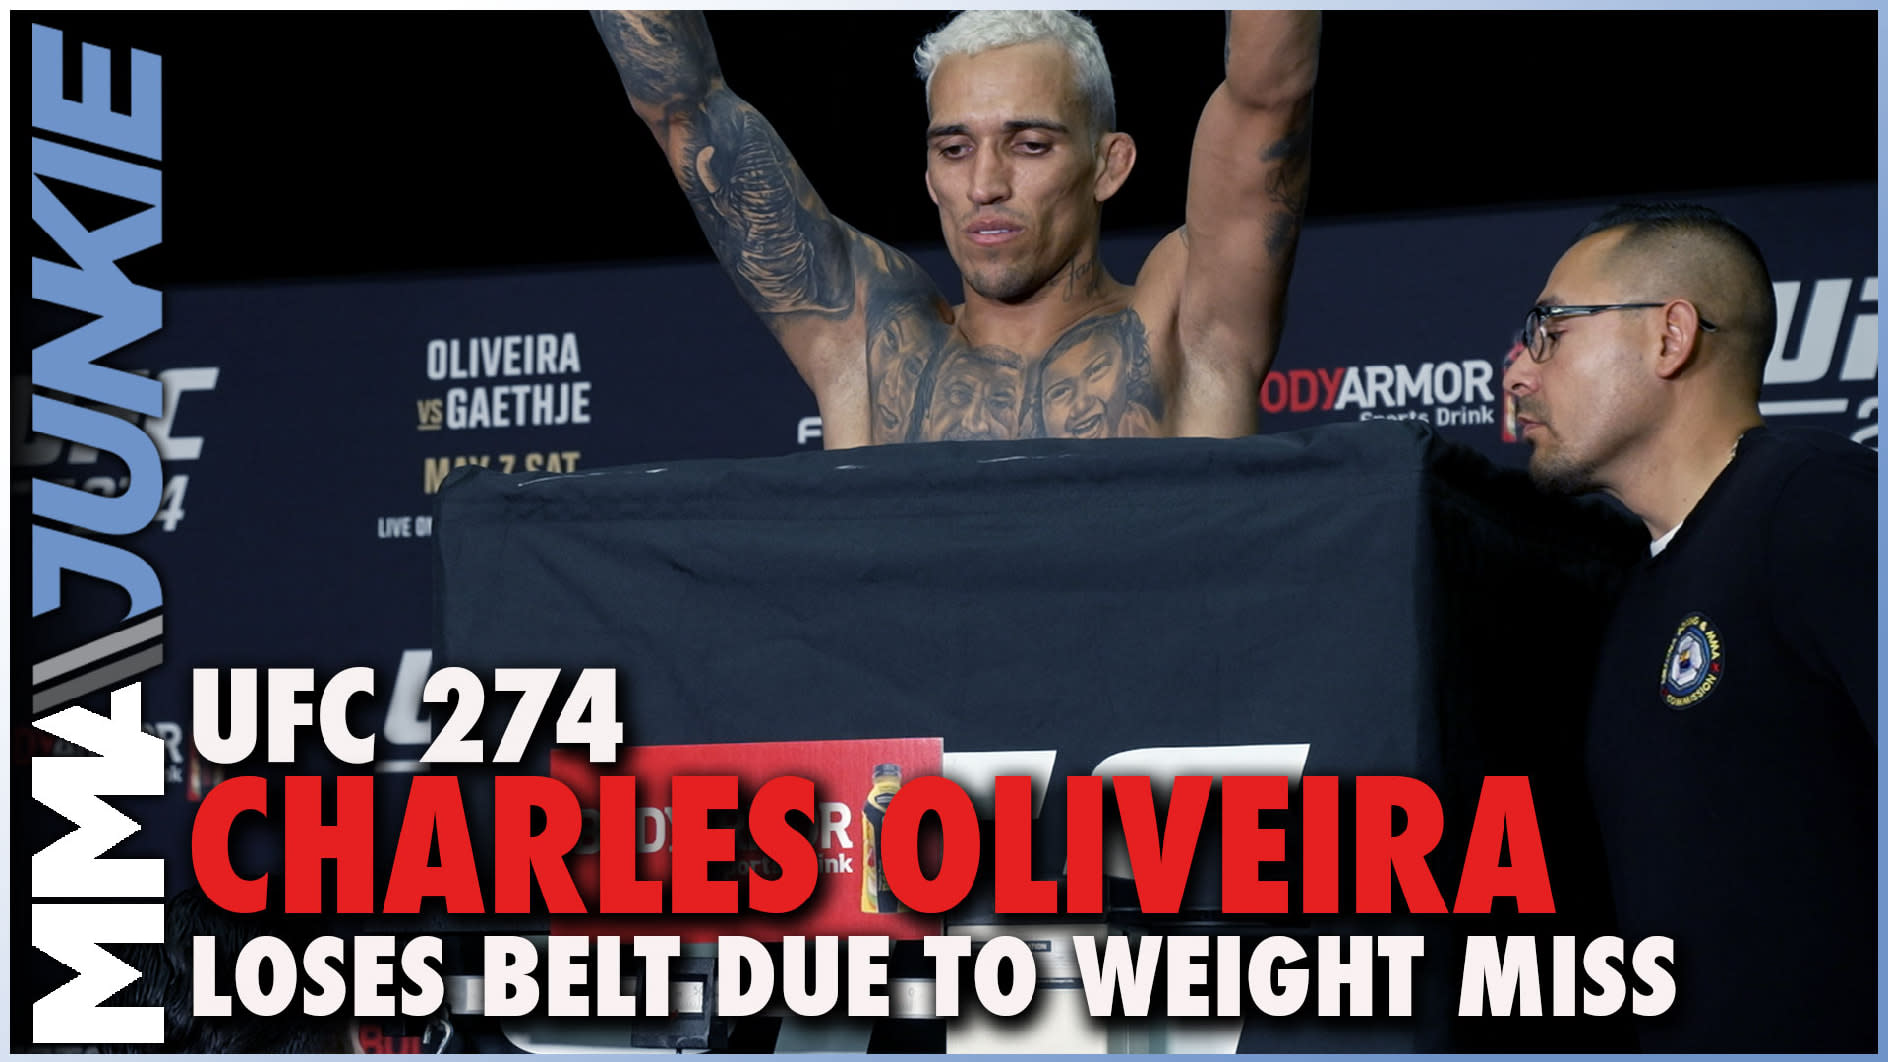 Joe Rogan says Charles Oliveira got screwed at UFC 274 Some people had messed with the scale